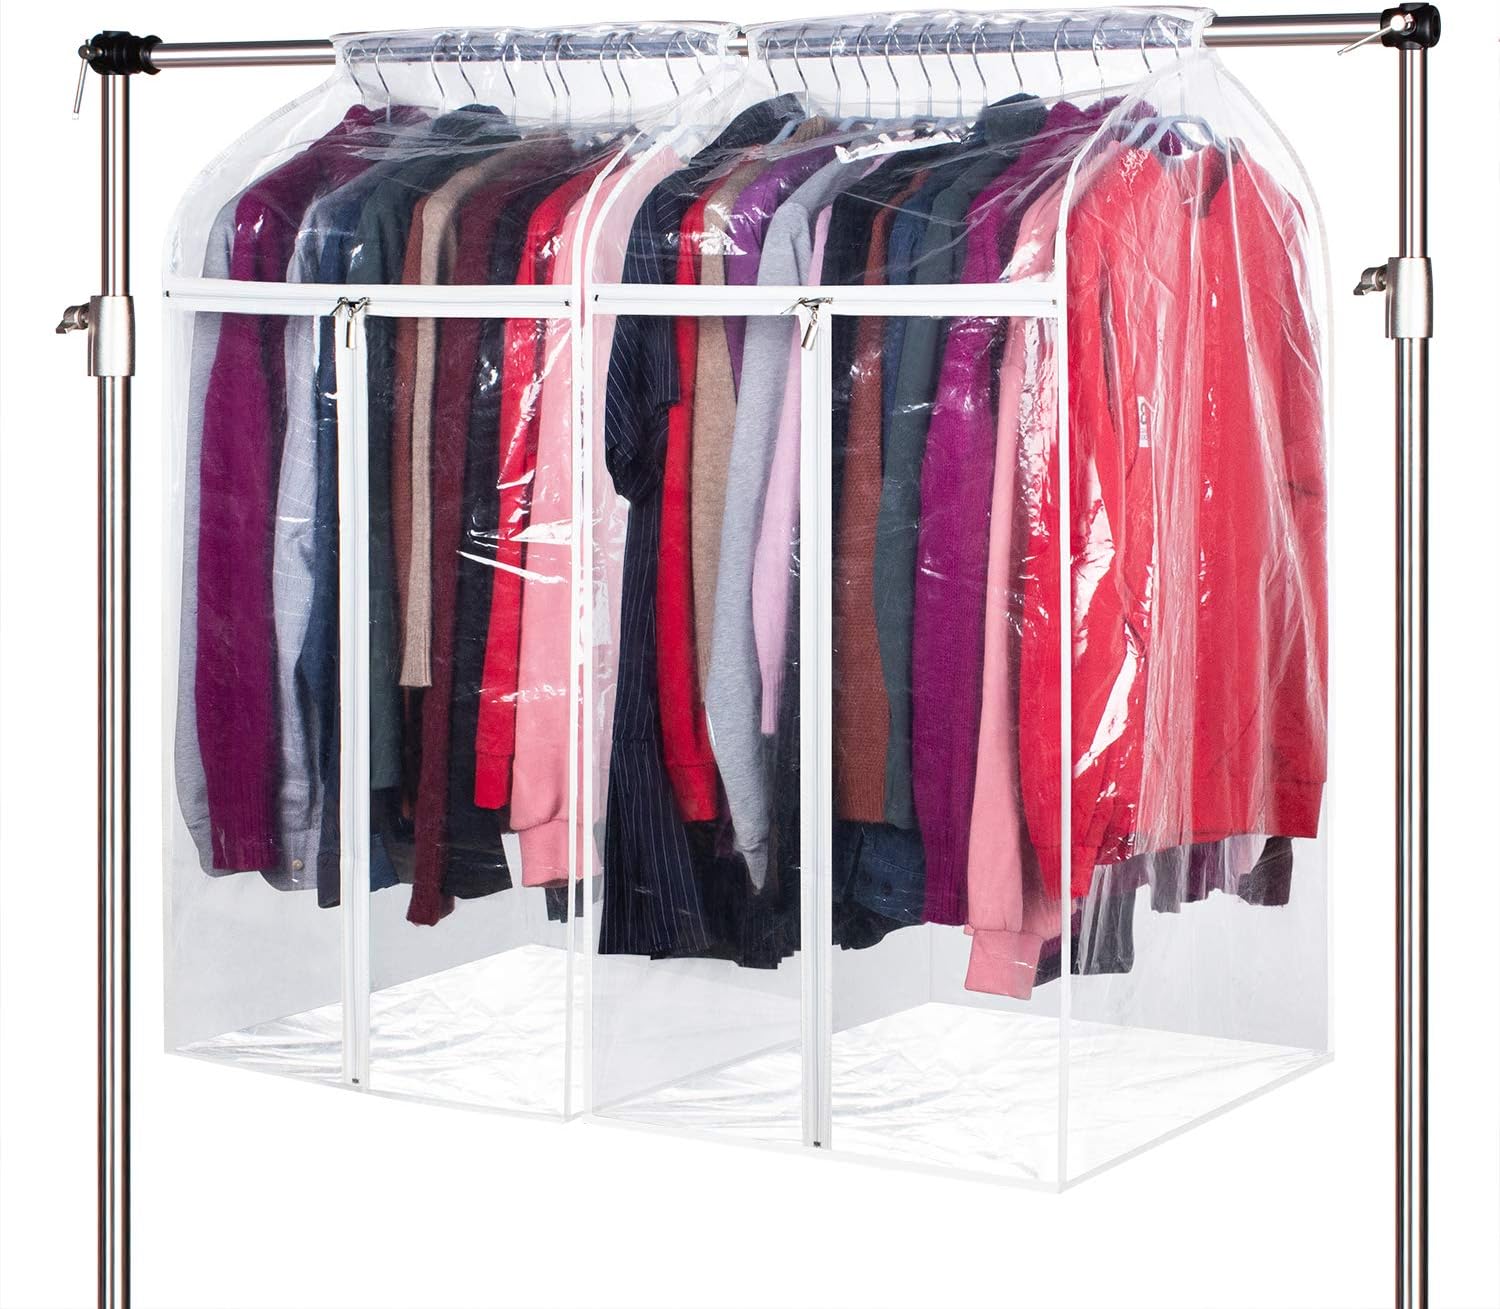 5 pcs/pack 4 sizes Available Garment Bags for Hanging Clothes Storage -  Suit Bag with Zipper, Dress Bag Dust Cover - Clear Storage Bags for  Clothing S